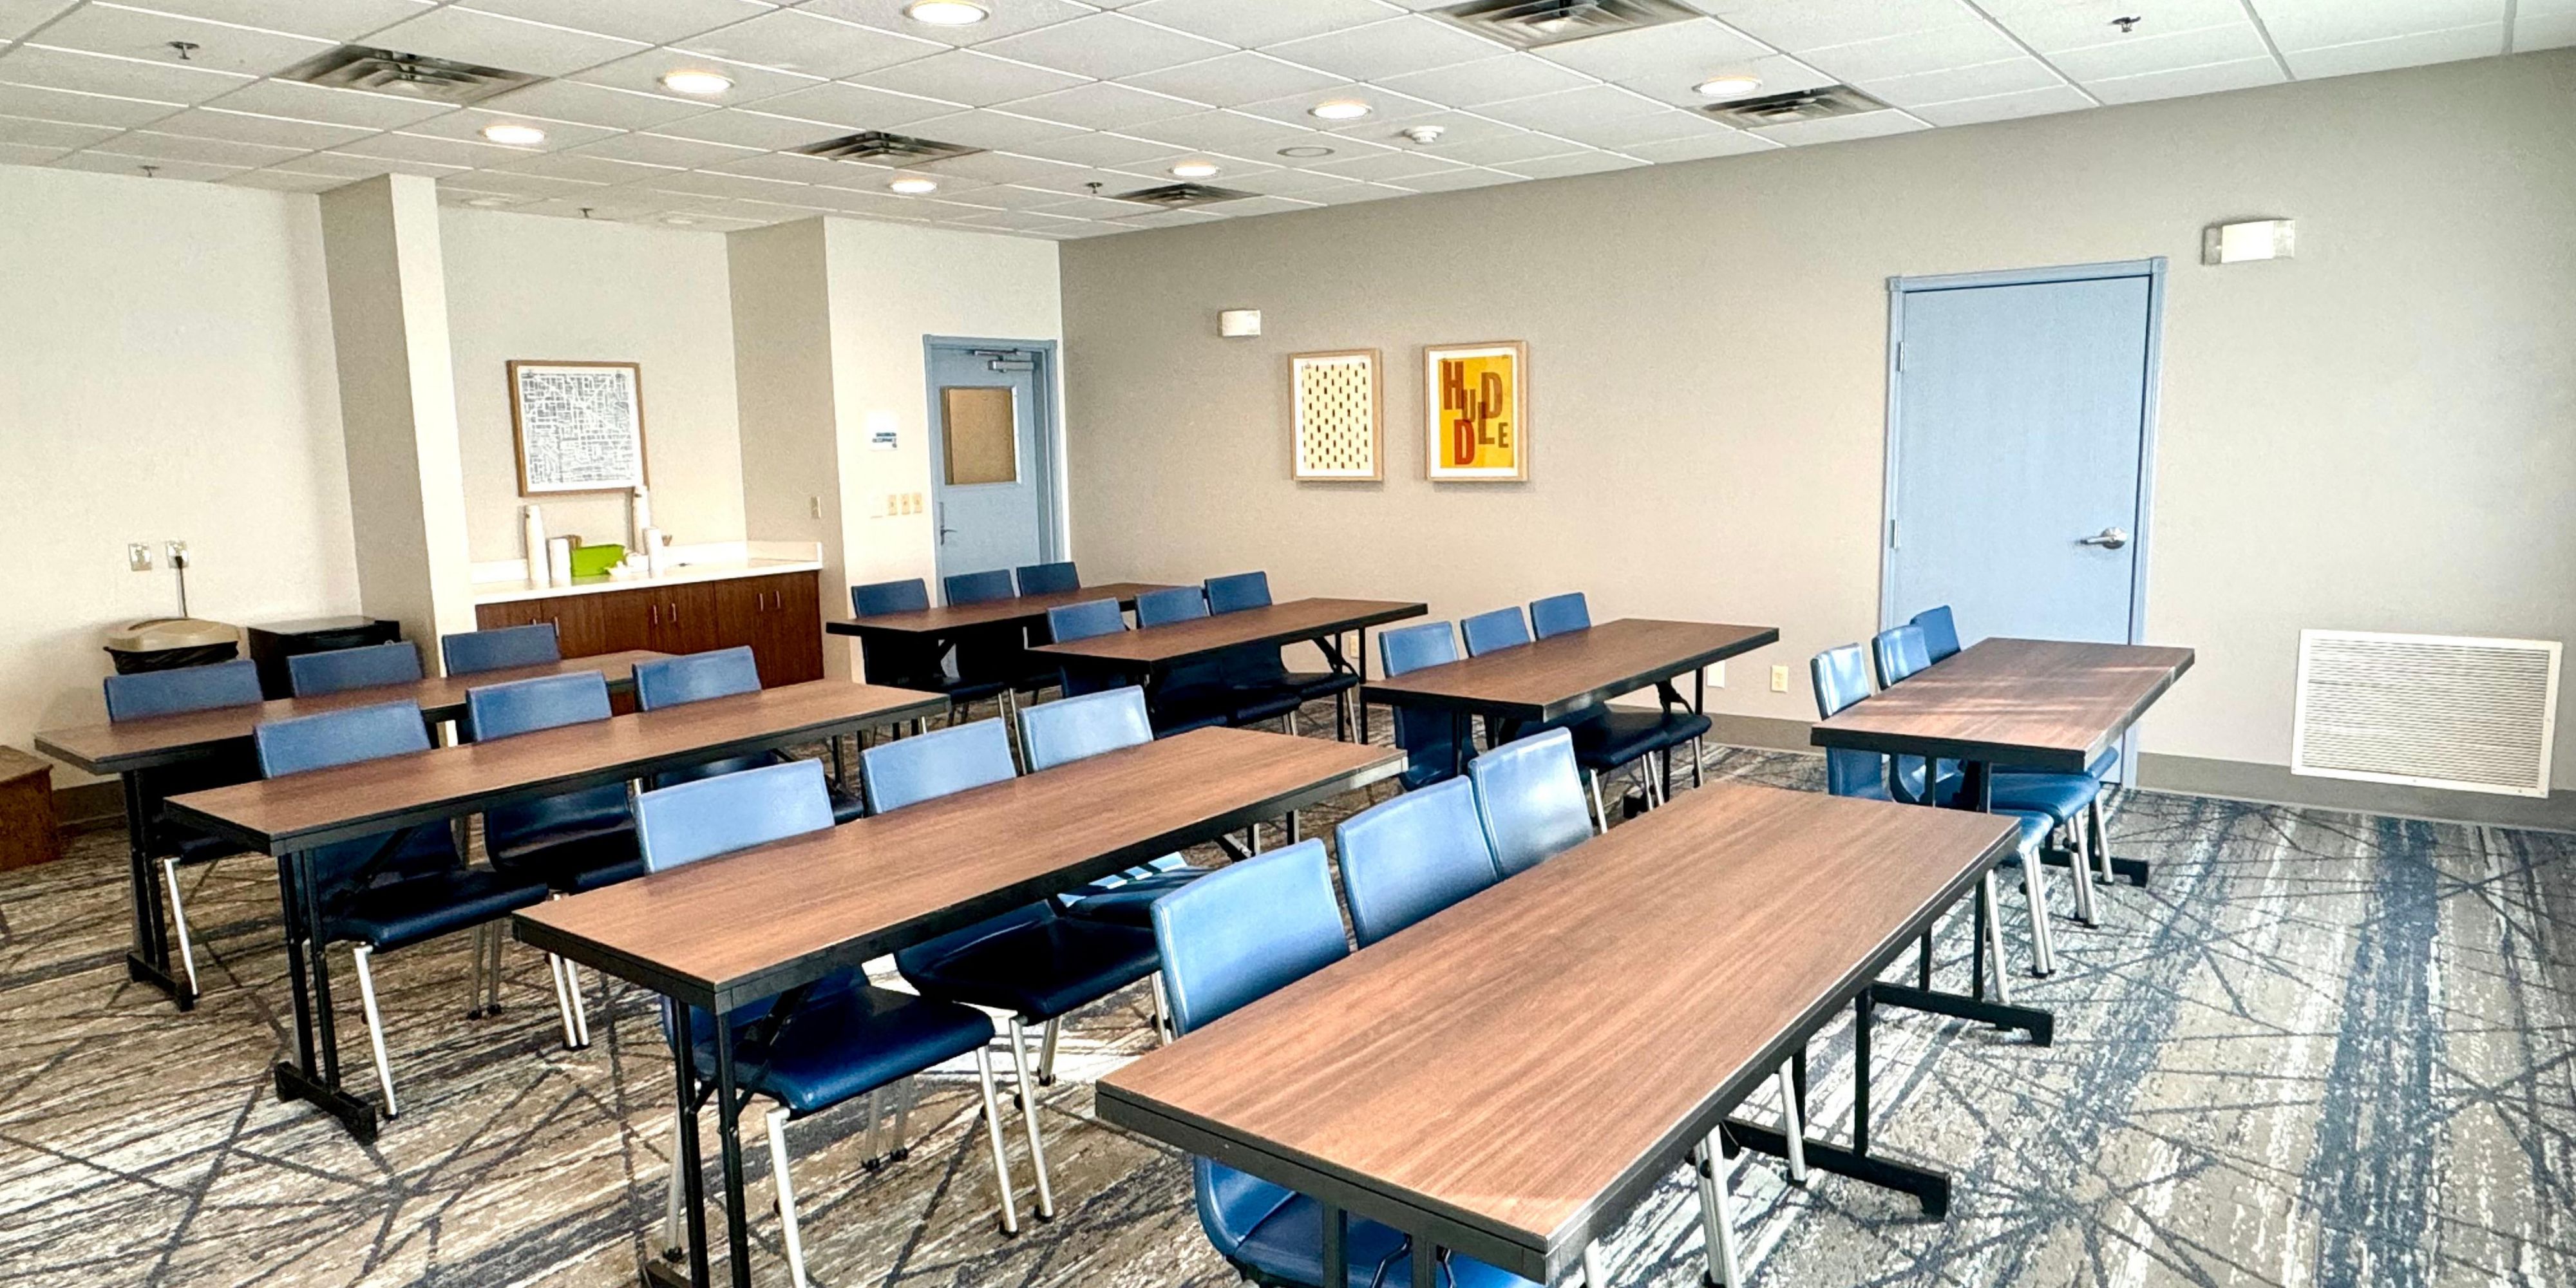 Host your Syracuse meeting at our hotel in Widewaters Corporate Park, near companies like Community Bank, Saab, Suburban Propane, Amazon, and ARCADIS. Our versatile 650 sq ft venue accommodates up to 30 guests. With a dedicated business center, free Wi-Fi, and A/V equipment, we ensure your meeting is a success.  Email Frankie Yaple: RSD@Suitehm.com